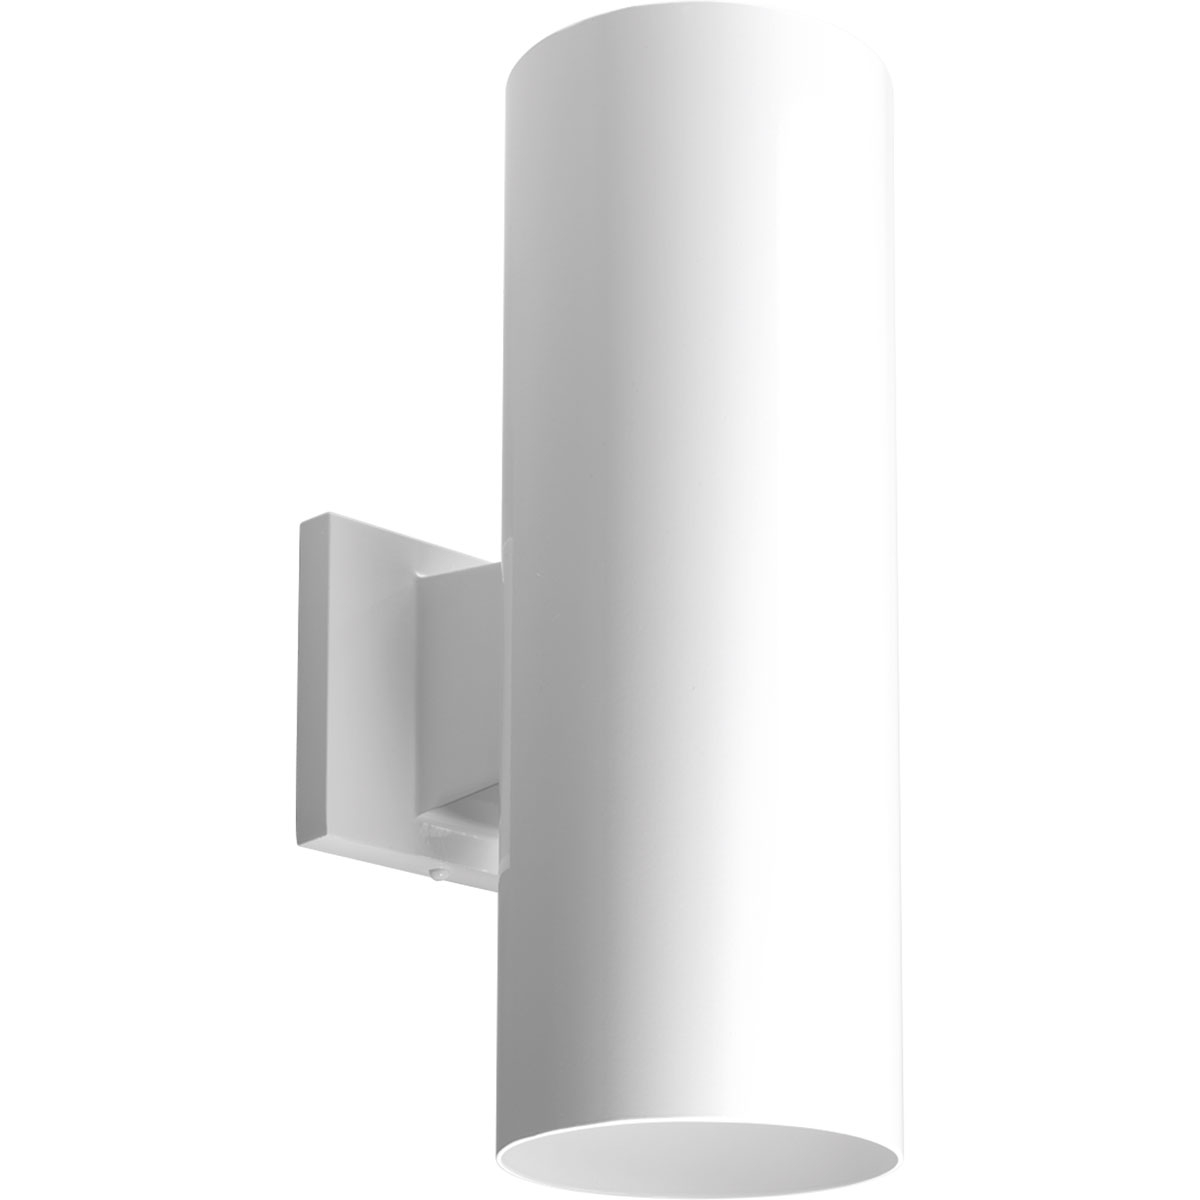 5 in LED up down wall cylinder - wall lantern in White. The P5675 Series are ideal for a wide variety of interior and exterior applications including residential and commercial. The Cylinders feature a 120V alternating current source and eliminates the need for a traditional LED driver. This modular approach results in an encapsulated luminaire that unites performance, cost and safety benefits. Specify P860045 top cover lens for use in wet locations.